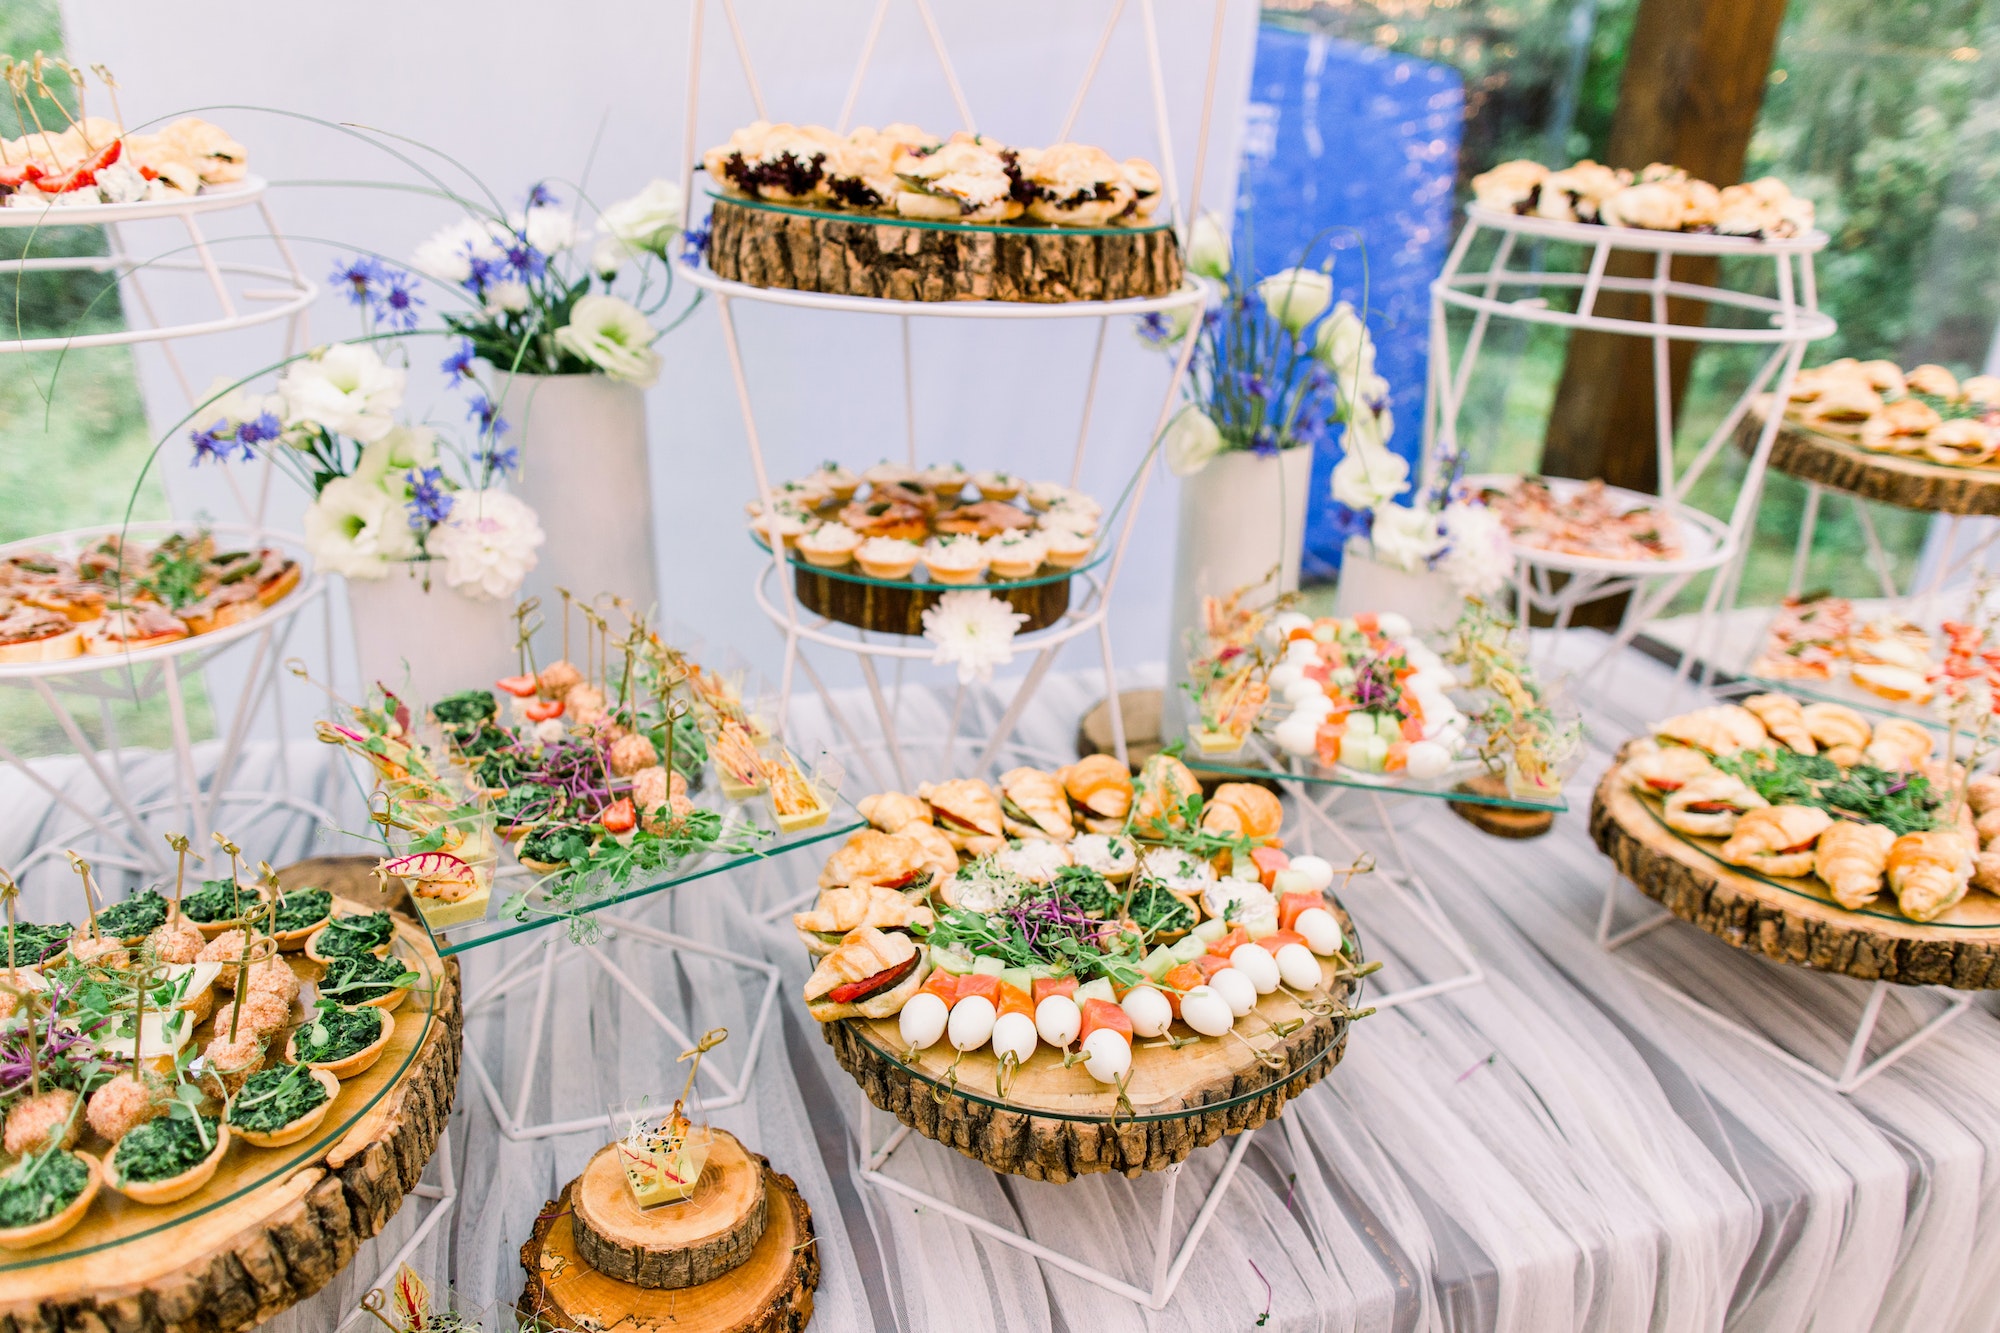 Catering buffet and rustic decor, outdoor wedding party with healthy food snacks